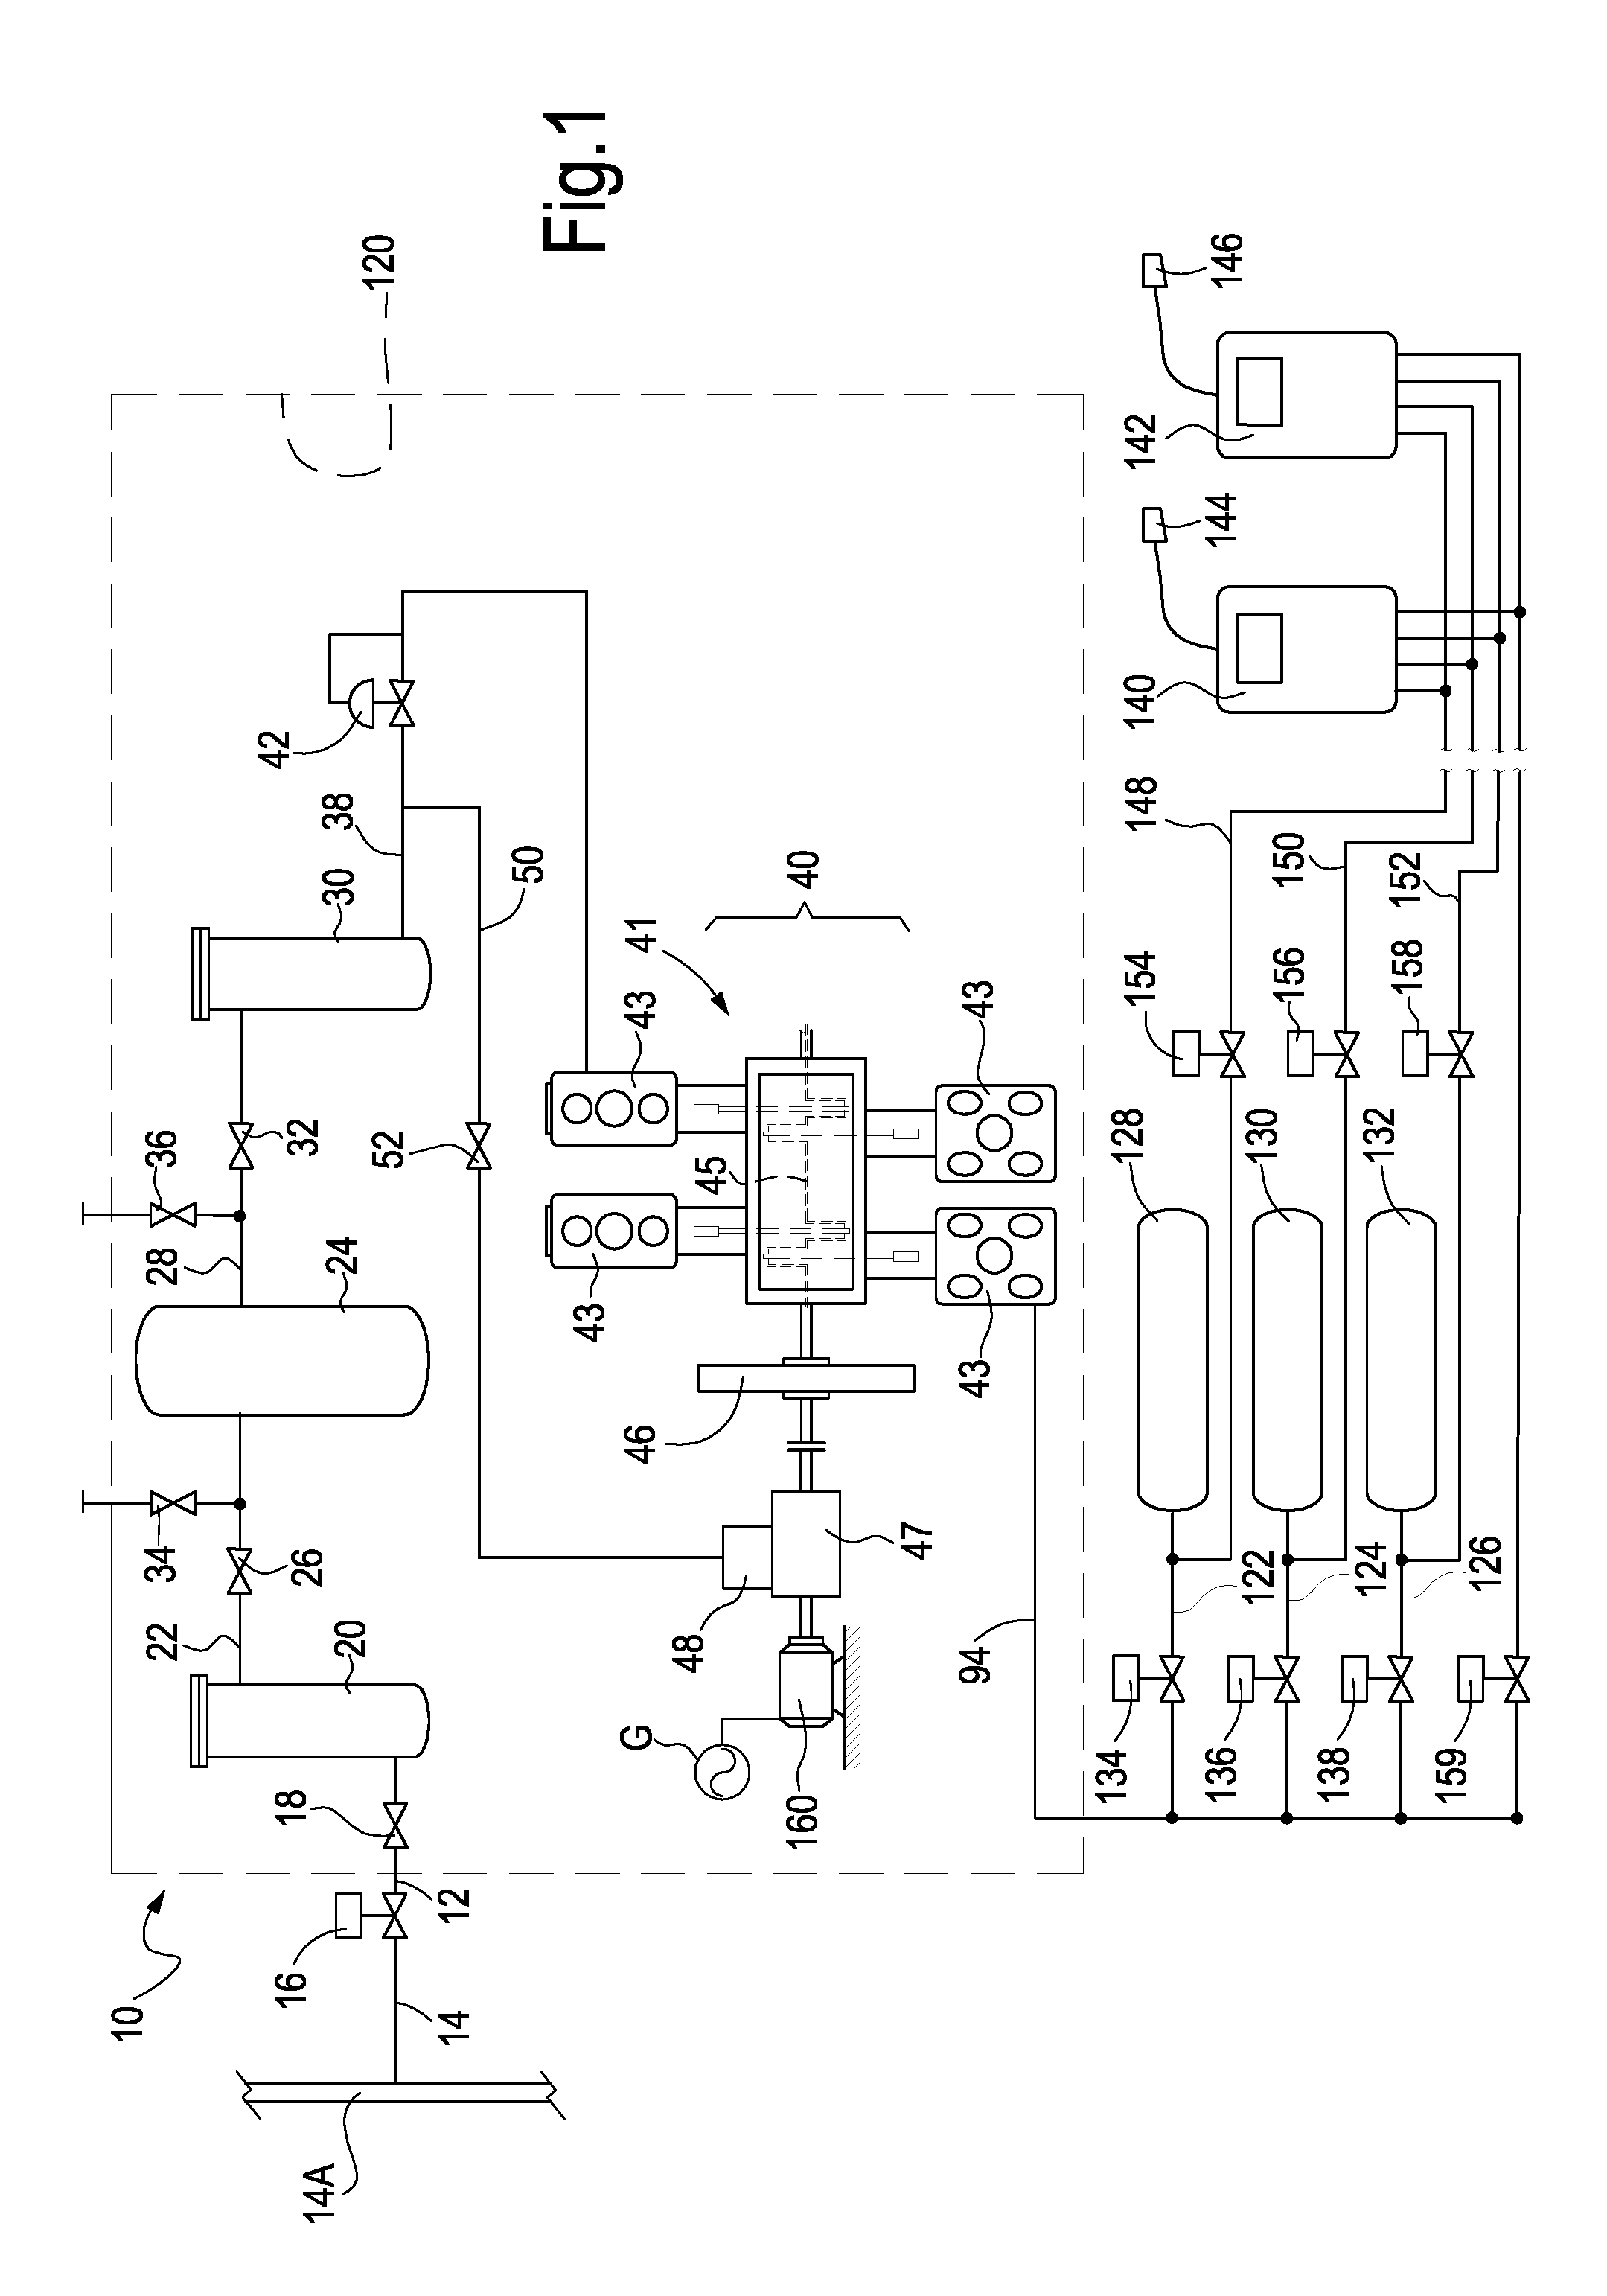 A compressed natural gas system and method